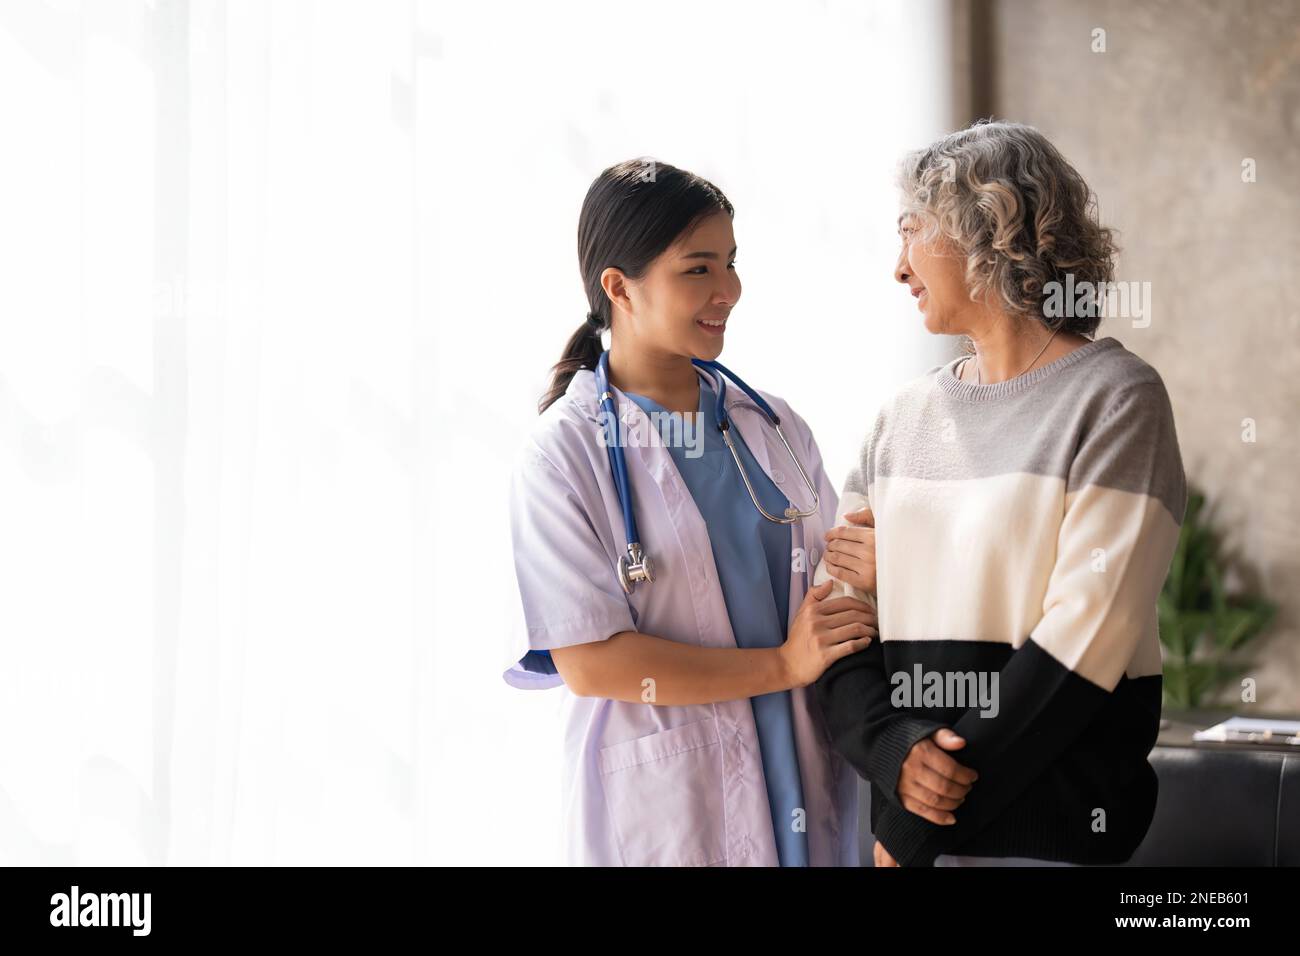 Young caregiver helping senior woman walking. Nurse assisting her old woman patient at nursing home. Senior woman with walking stick being helped by Stock Photo